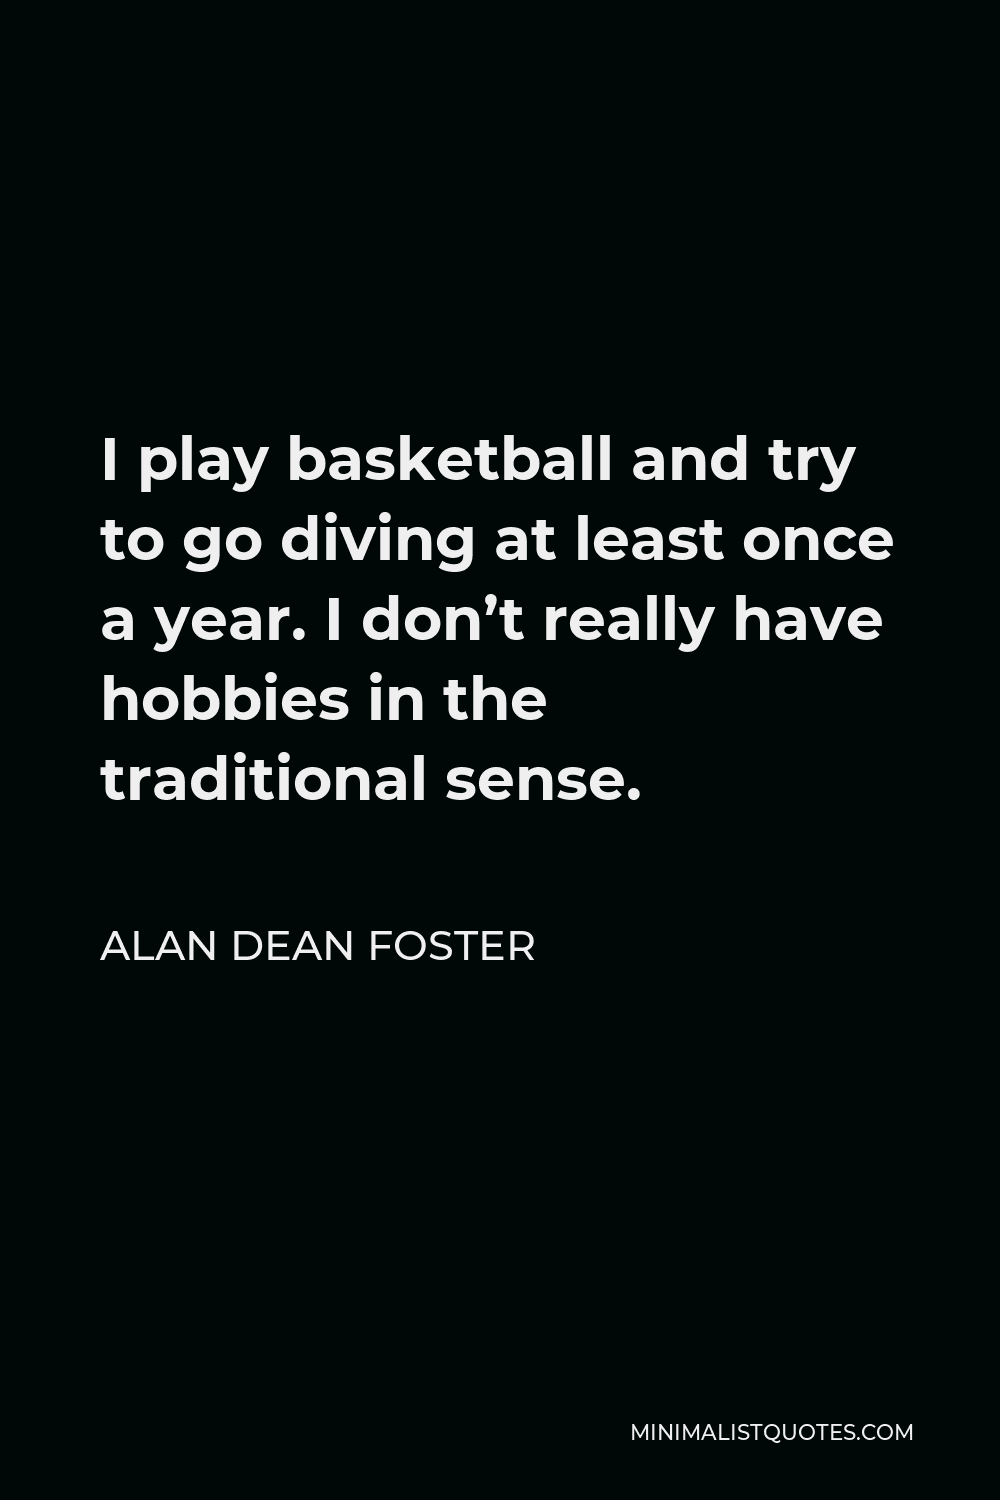 Alan Dean Foster Quote - I play basketball and try to go diving at least once a year. I don’t really have hobbies in the traditional sense.